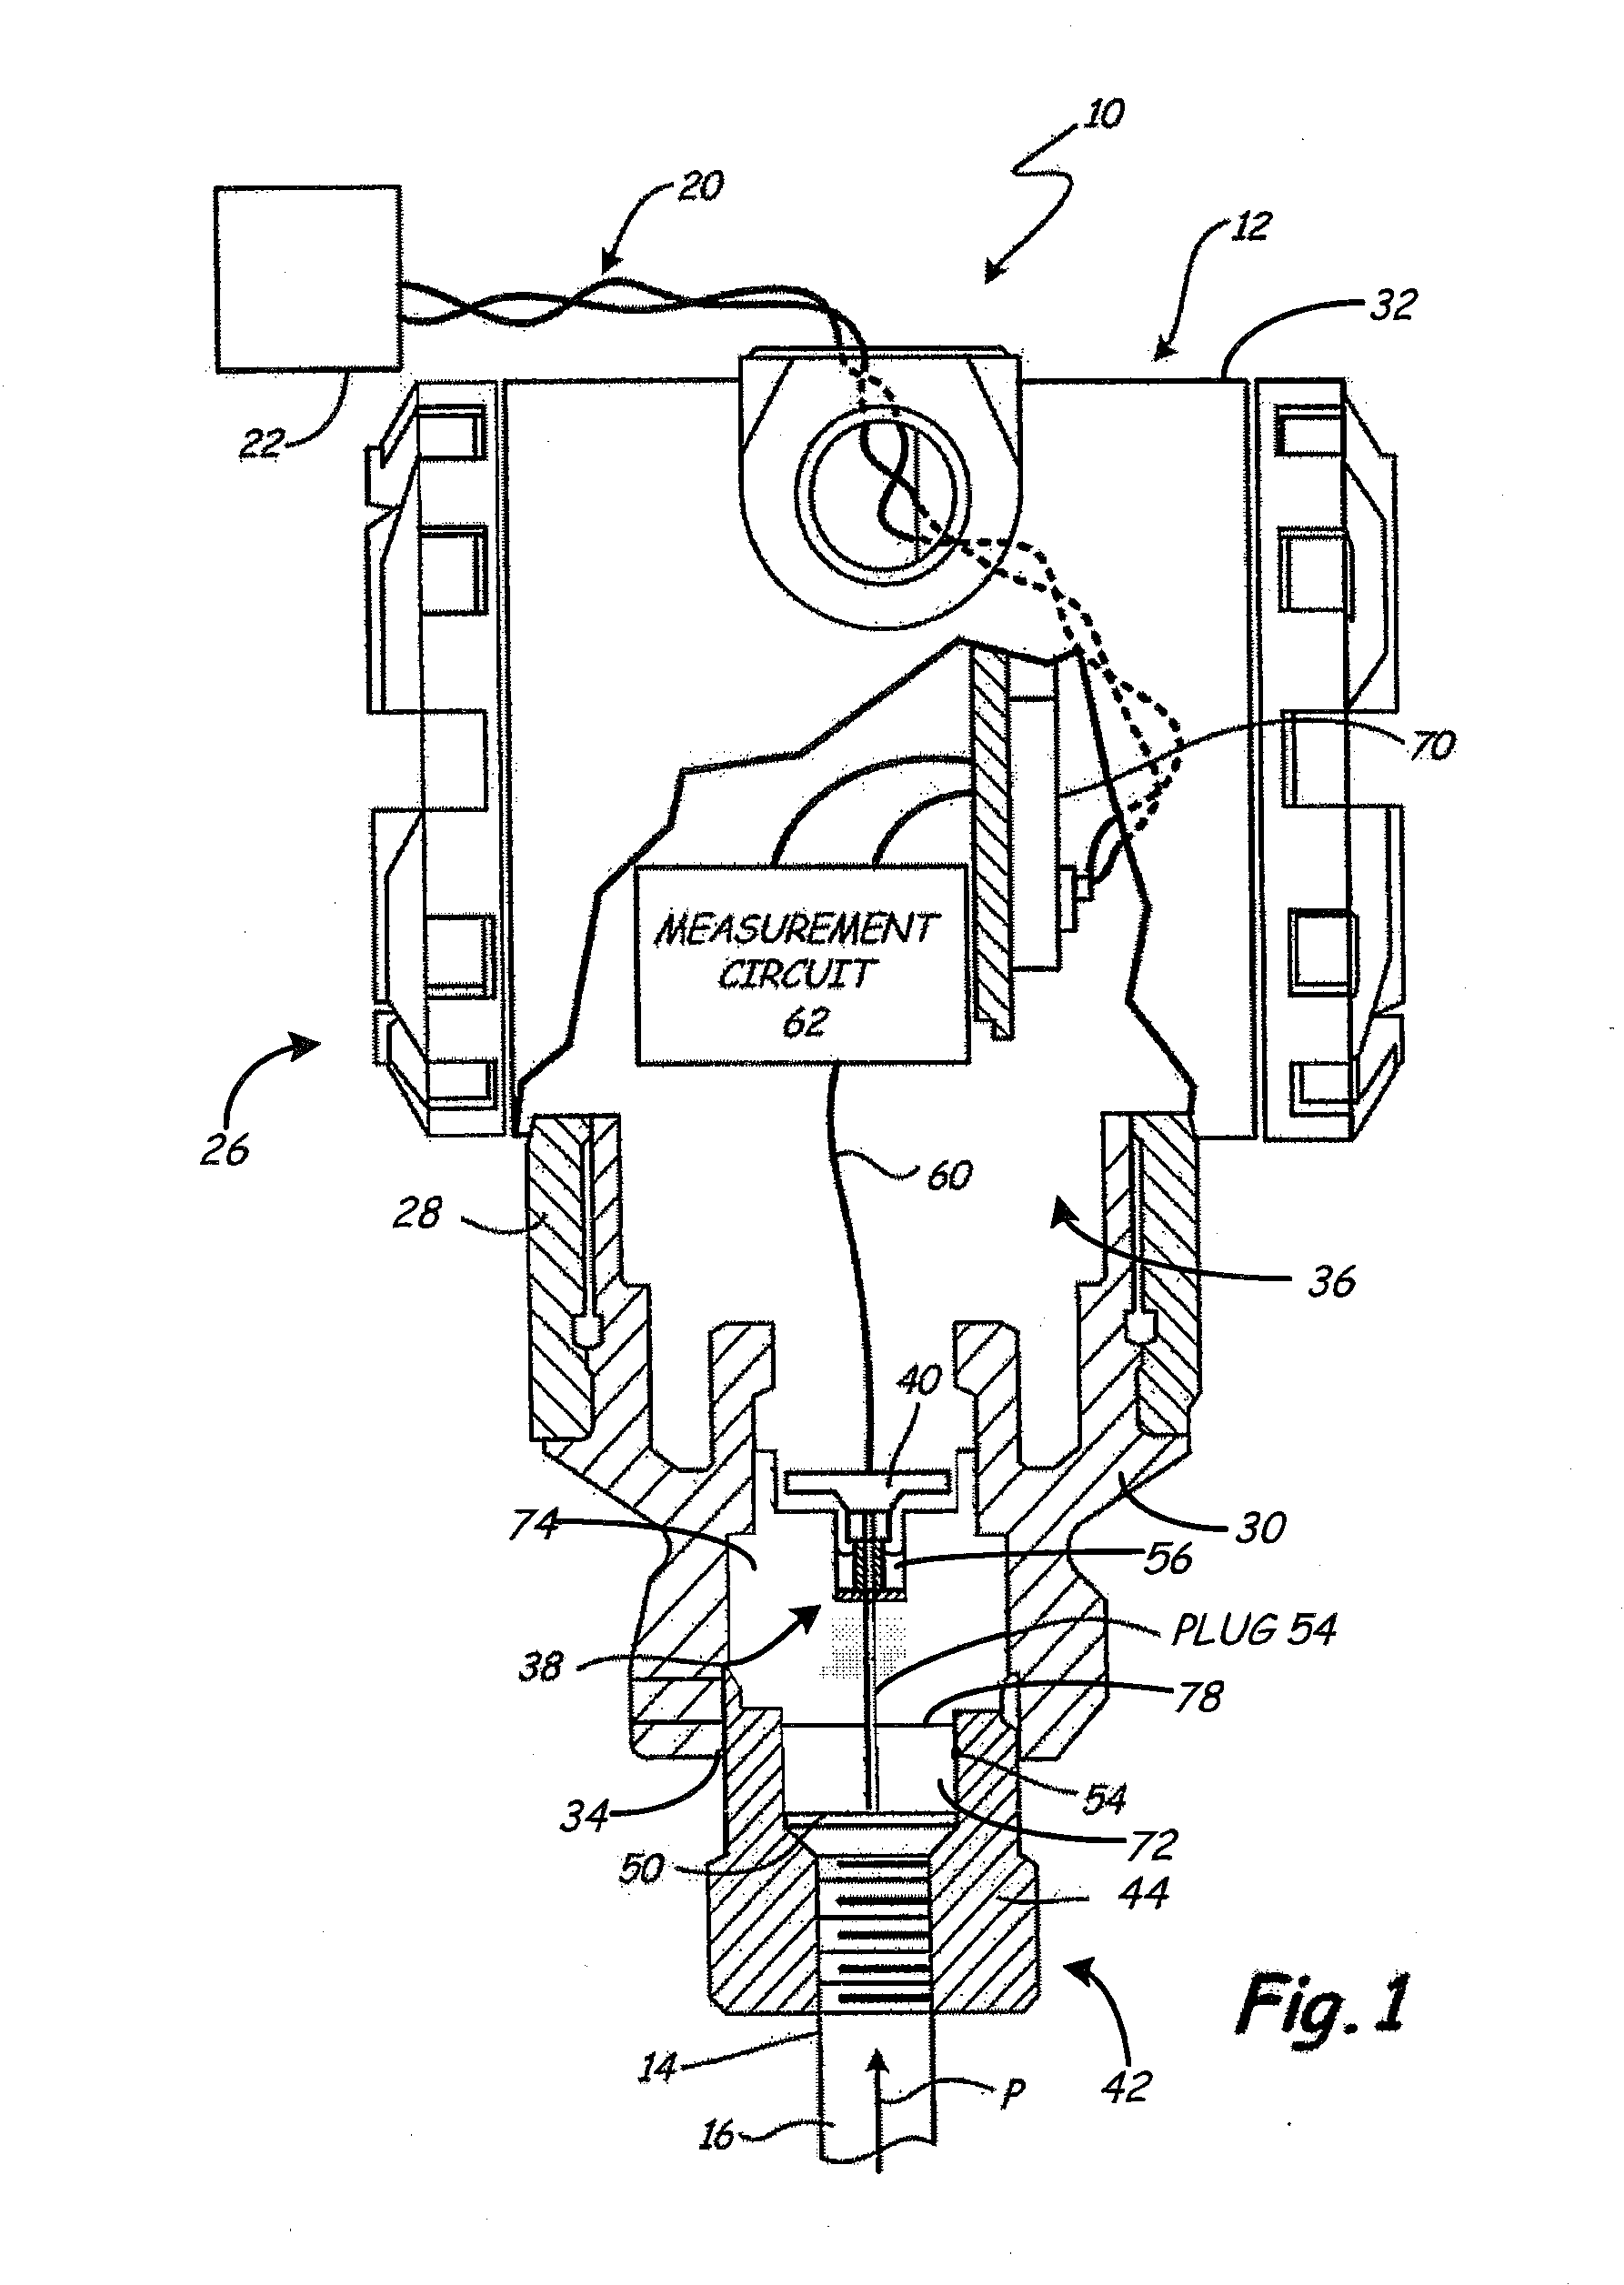 Pressure transmitter having an isolation assembly with a two-piece isolator plug